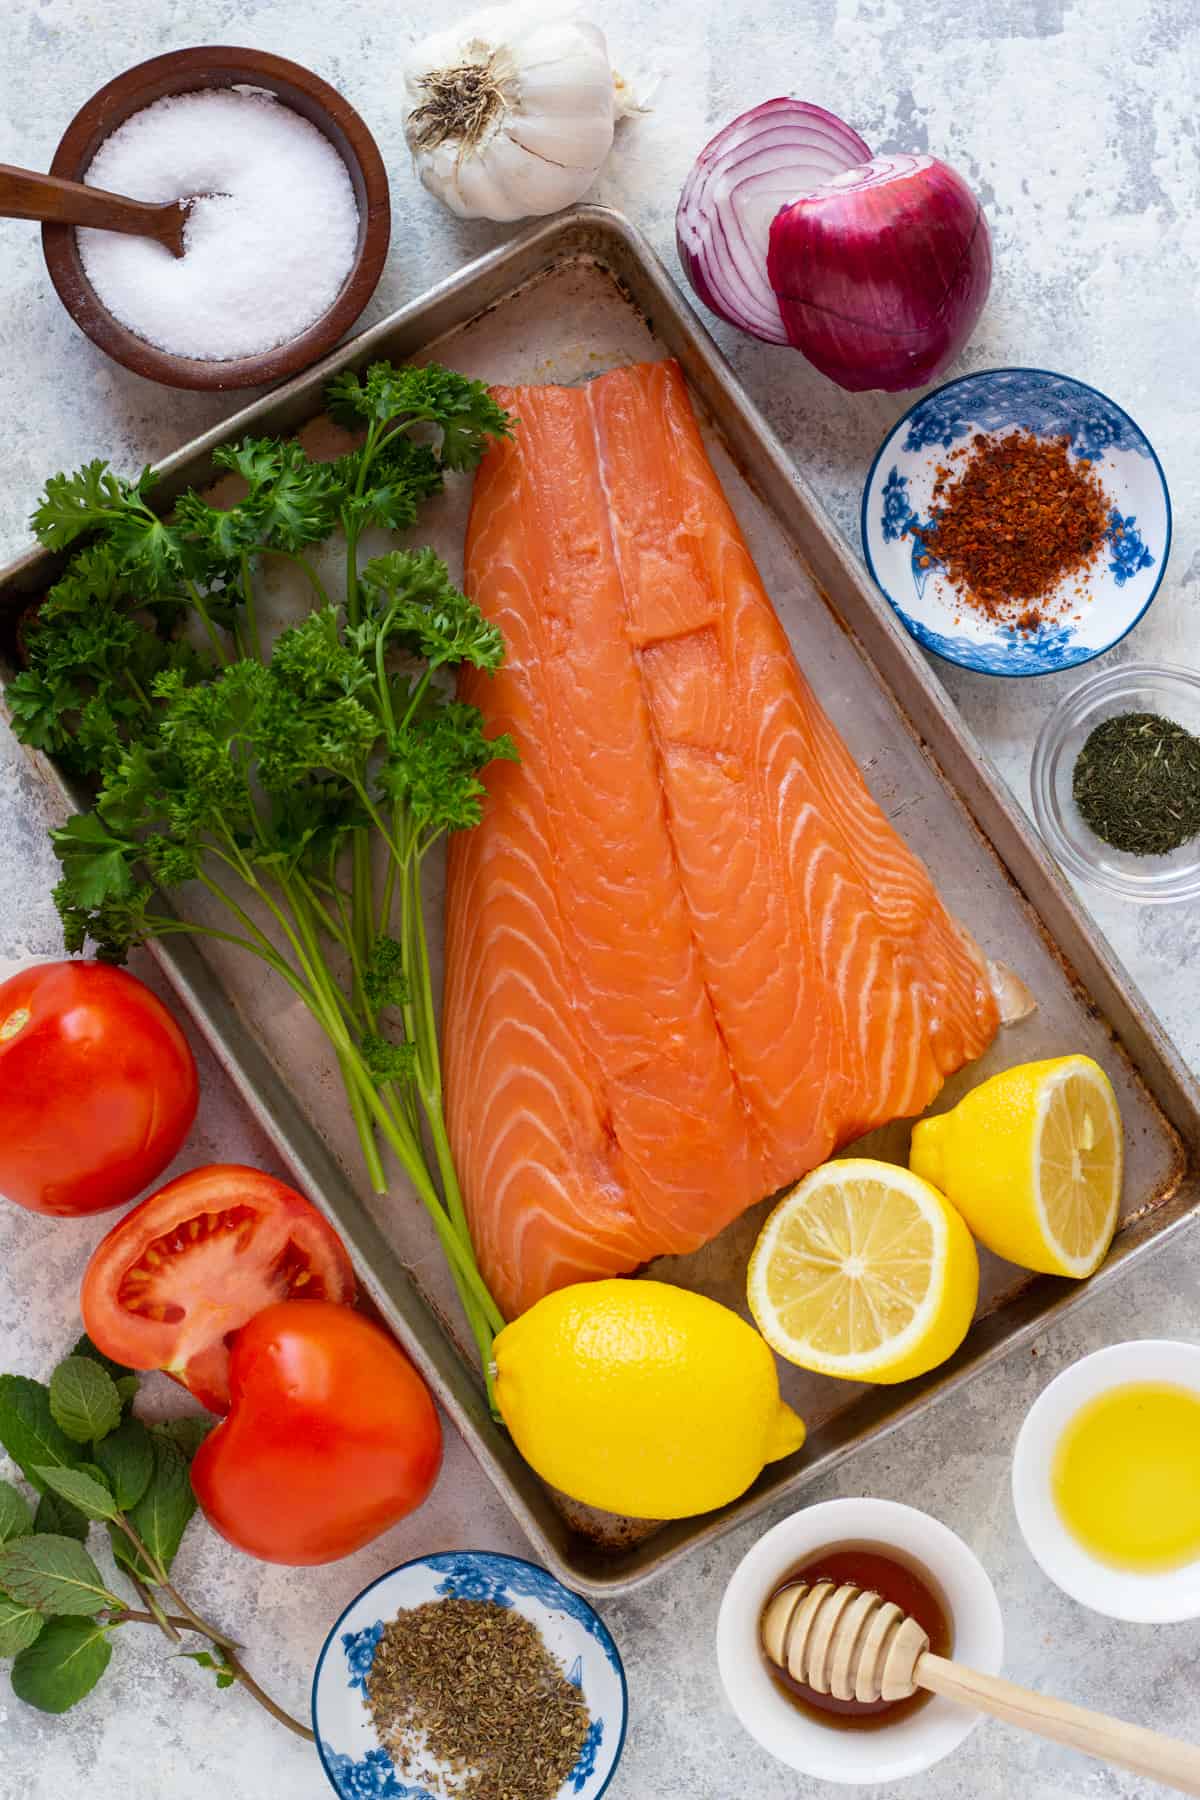 to make salmon marinade you need salmon, lemon juice, olive oil, garlic, spices and herbs.